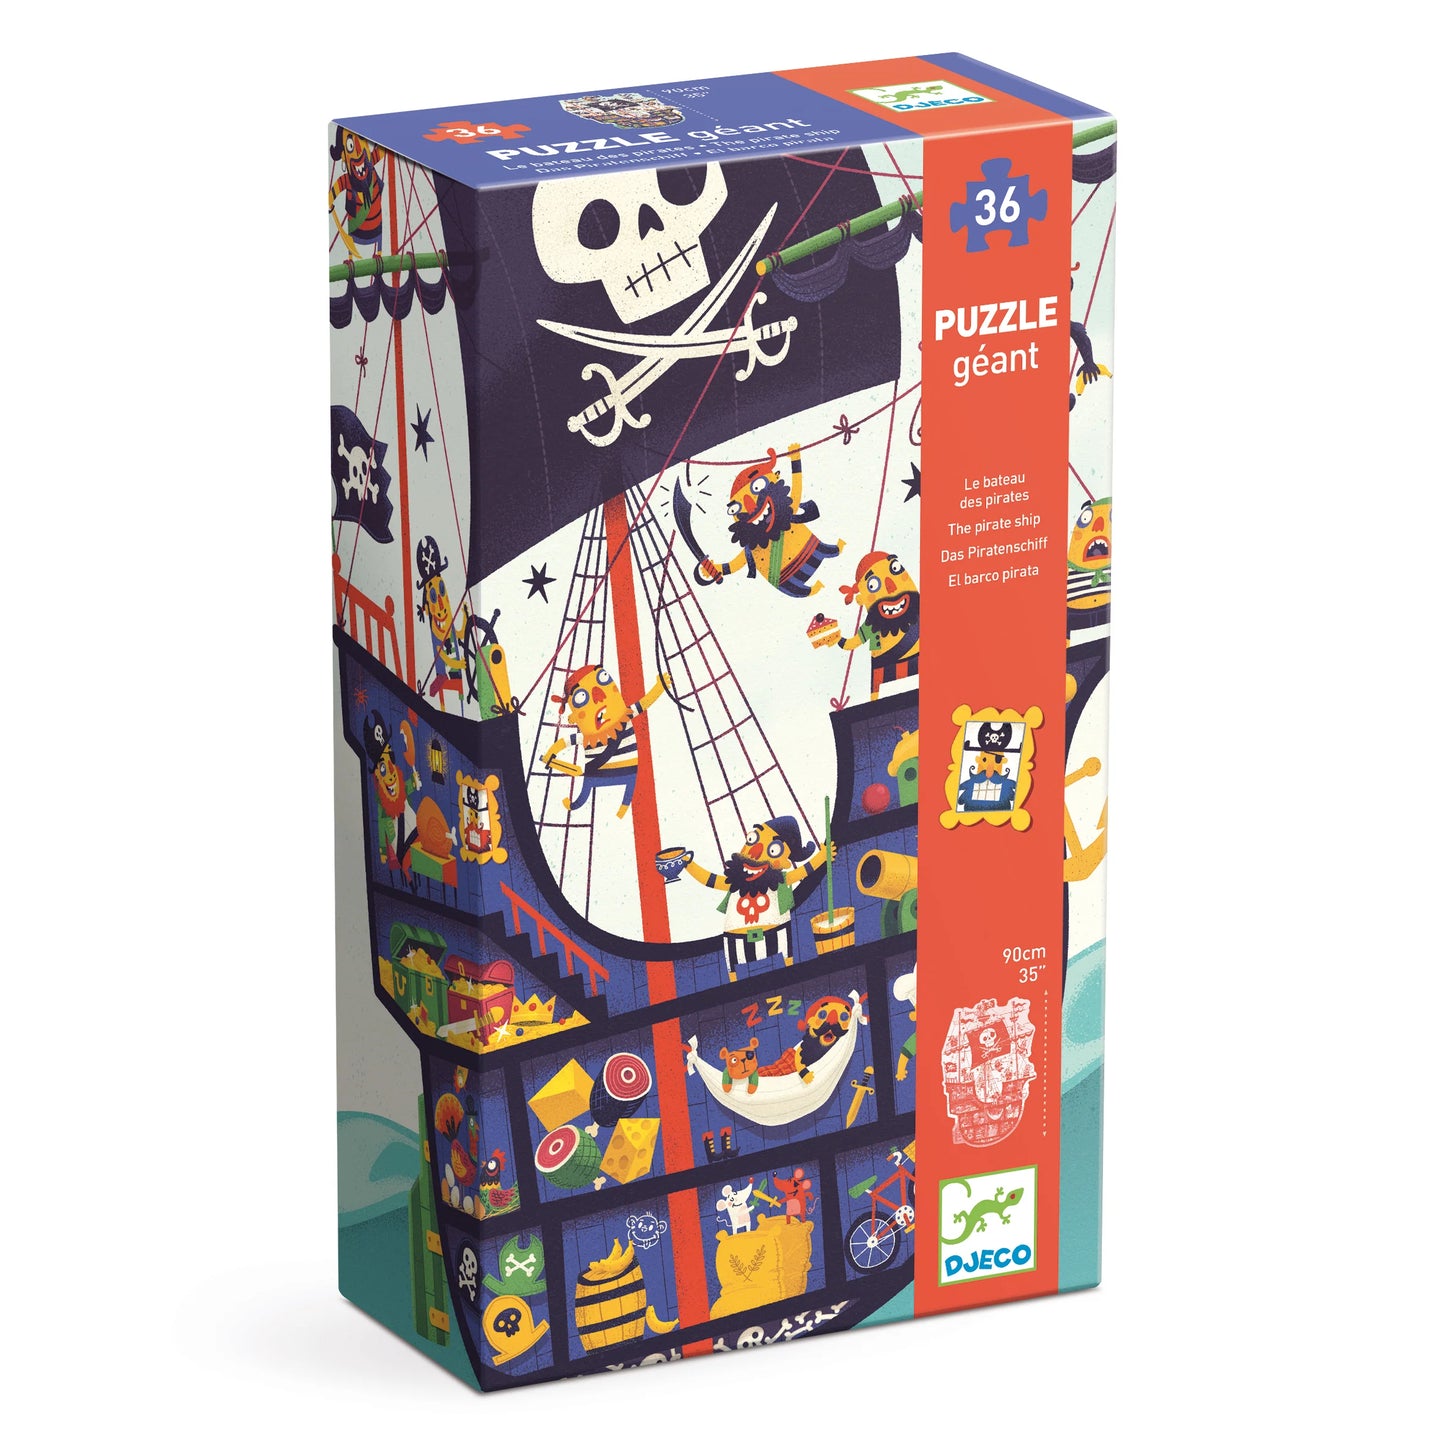 The Pirate Ship | 36pc Giant Floor Jigsaw Puzzle